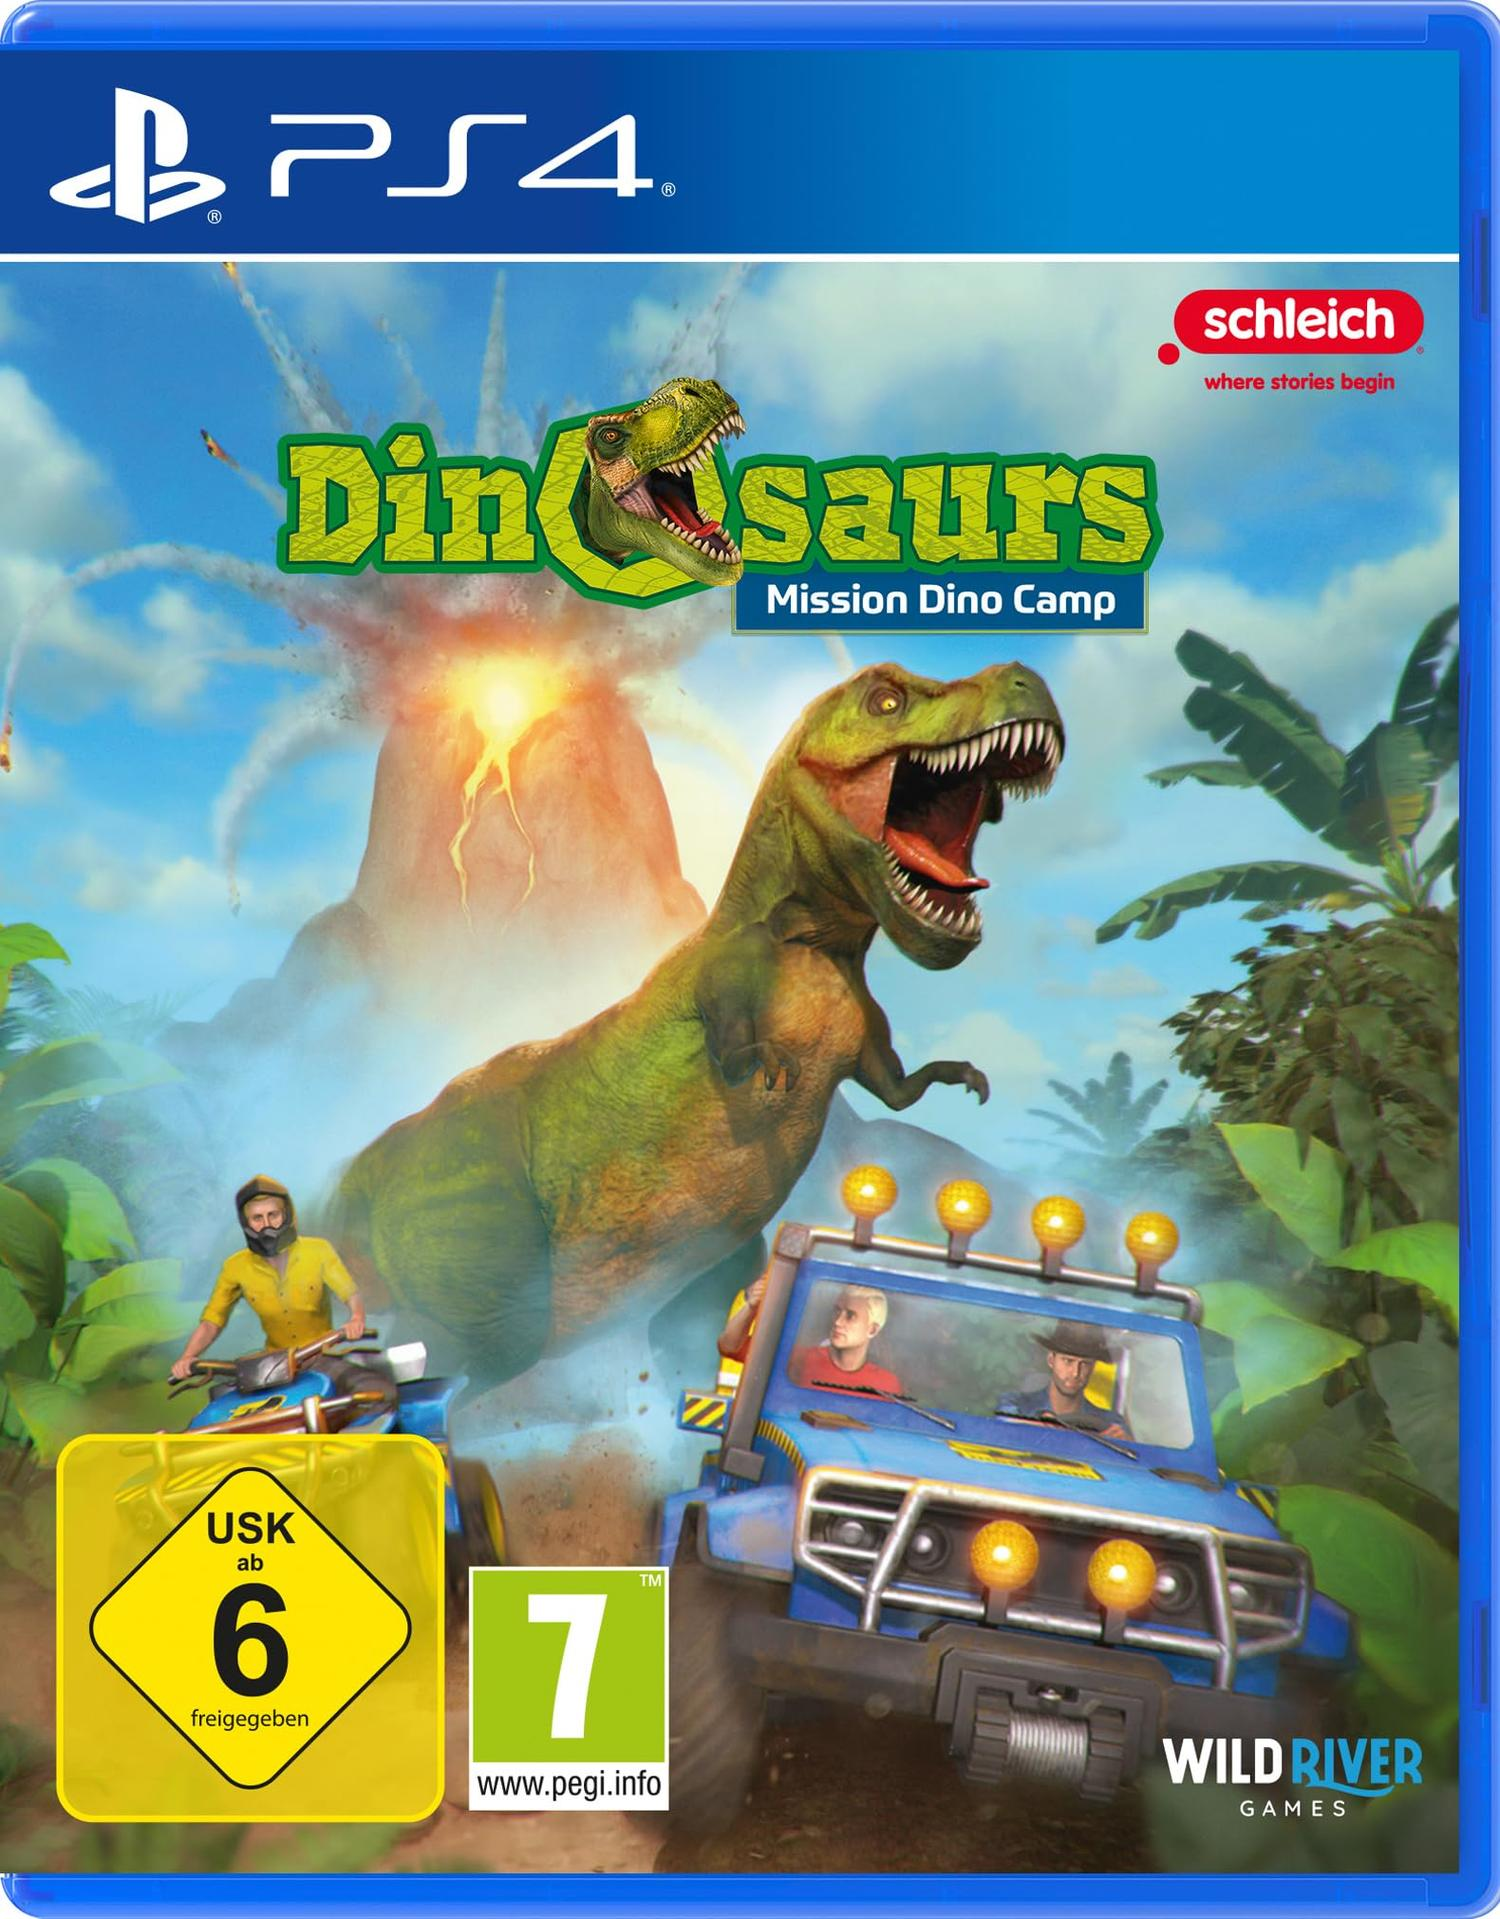 Camp Dinosaurs [PlayStation Schleich 4] PS4 - Dino Mission